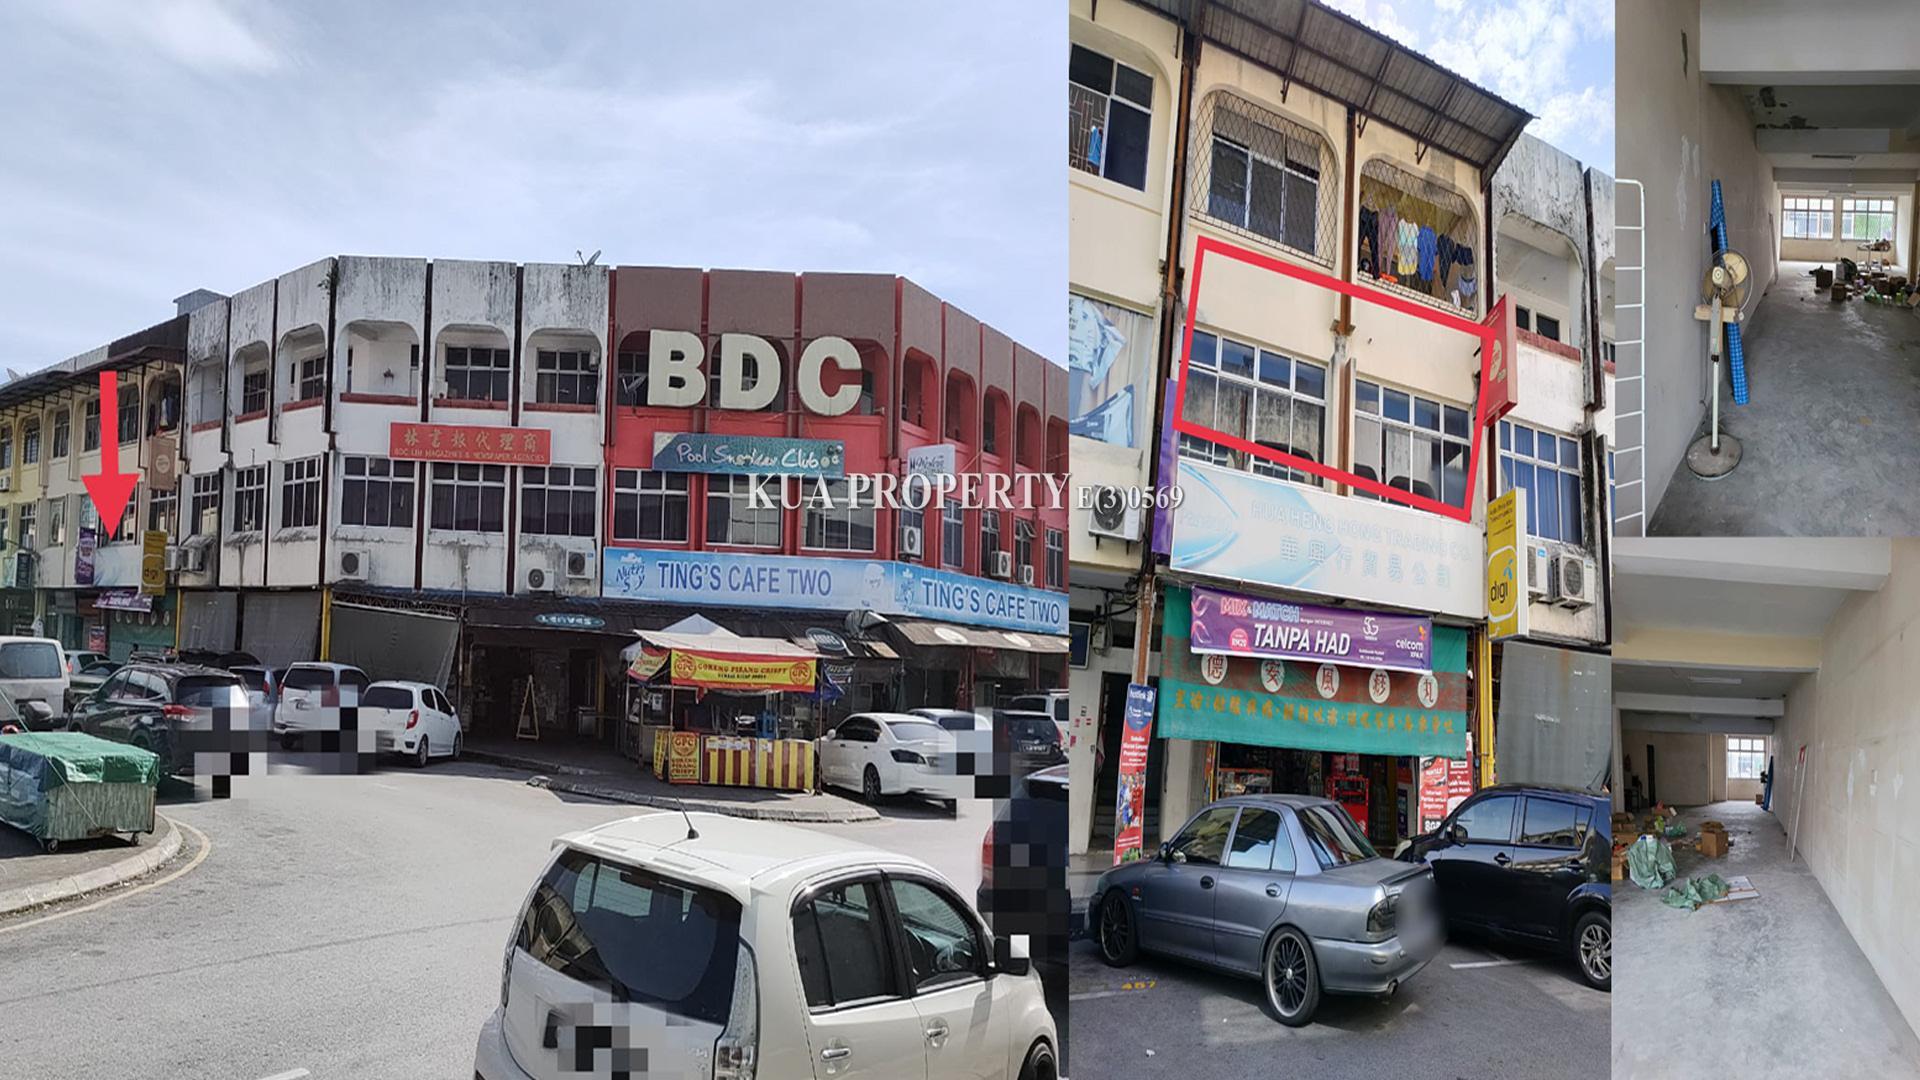 First Floor Office/Shoplot For Rent! Located at BDC, Kuching